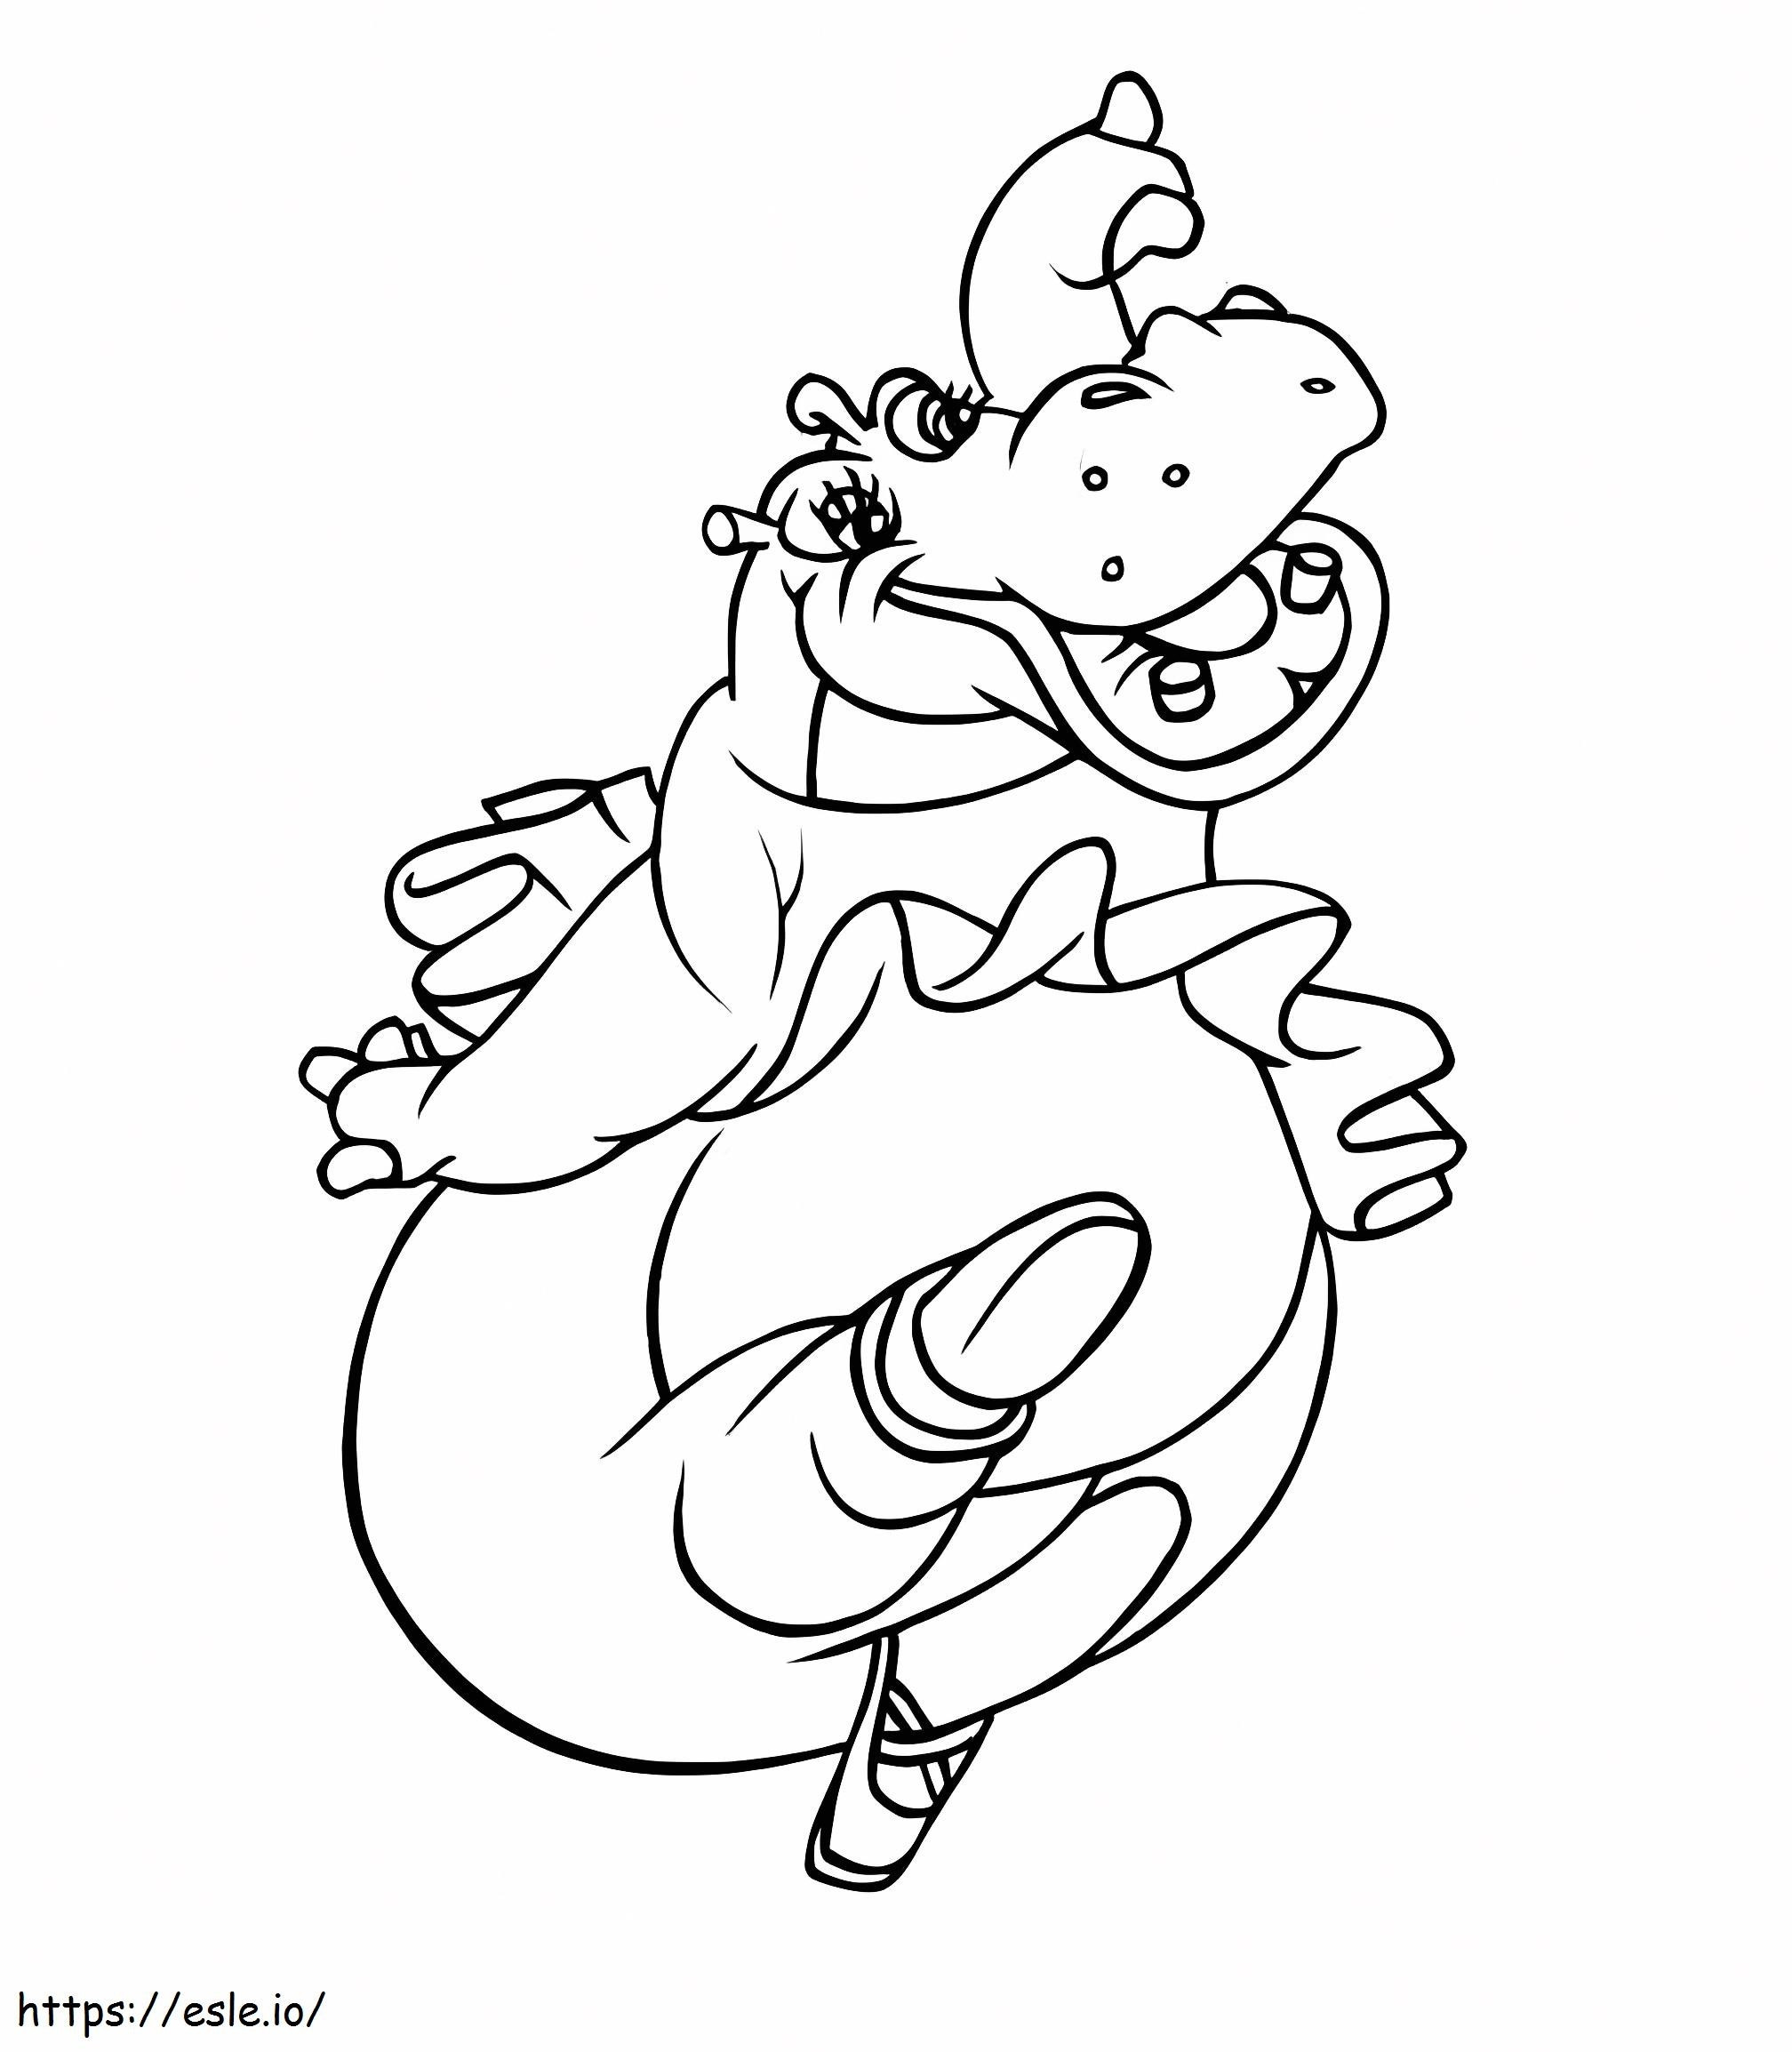 Hippo From Fantasia coloring page